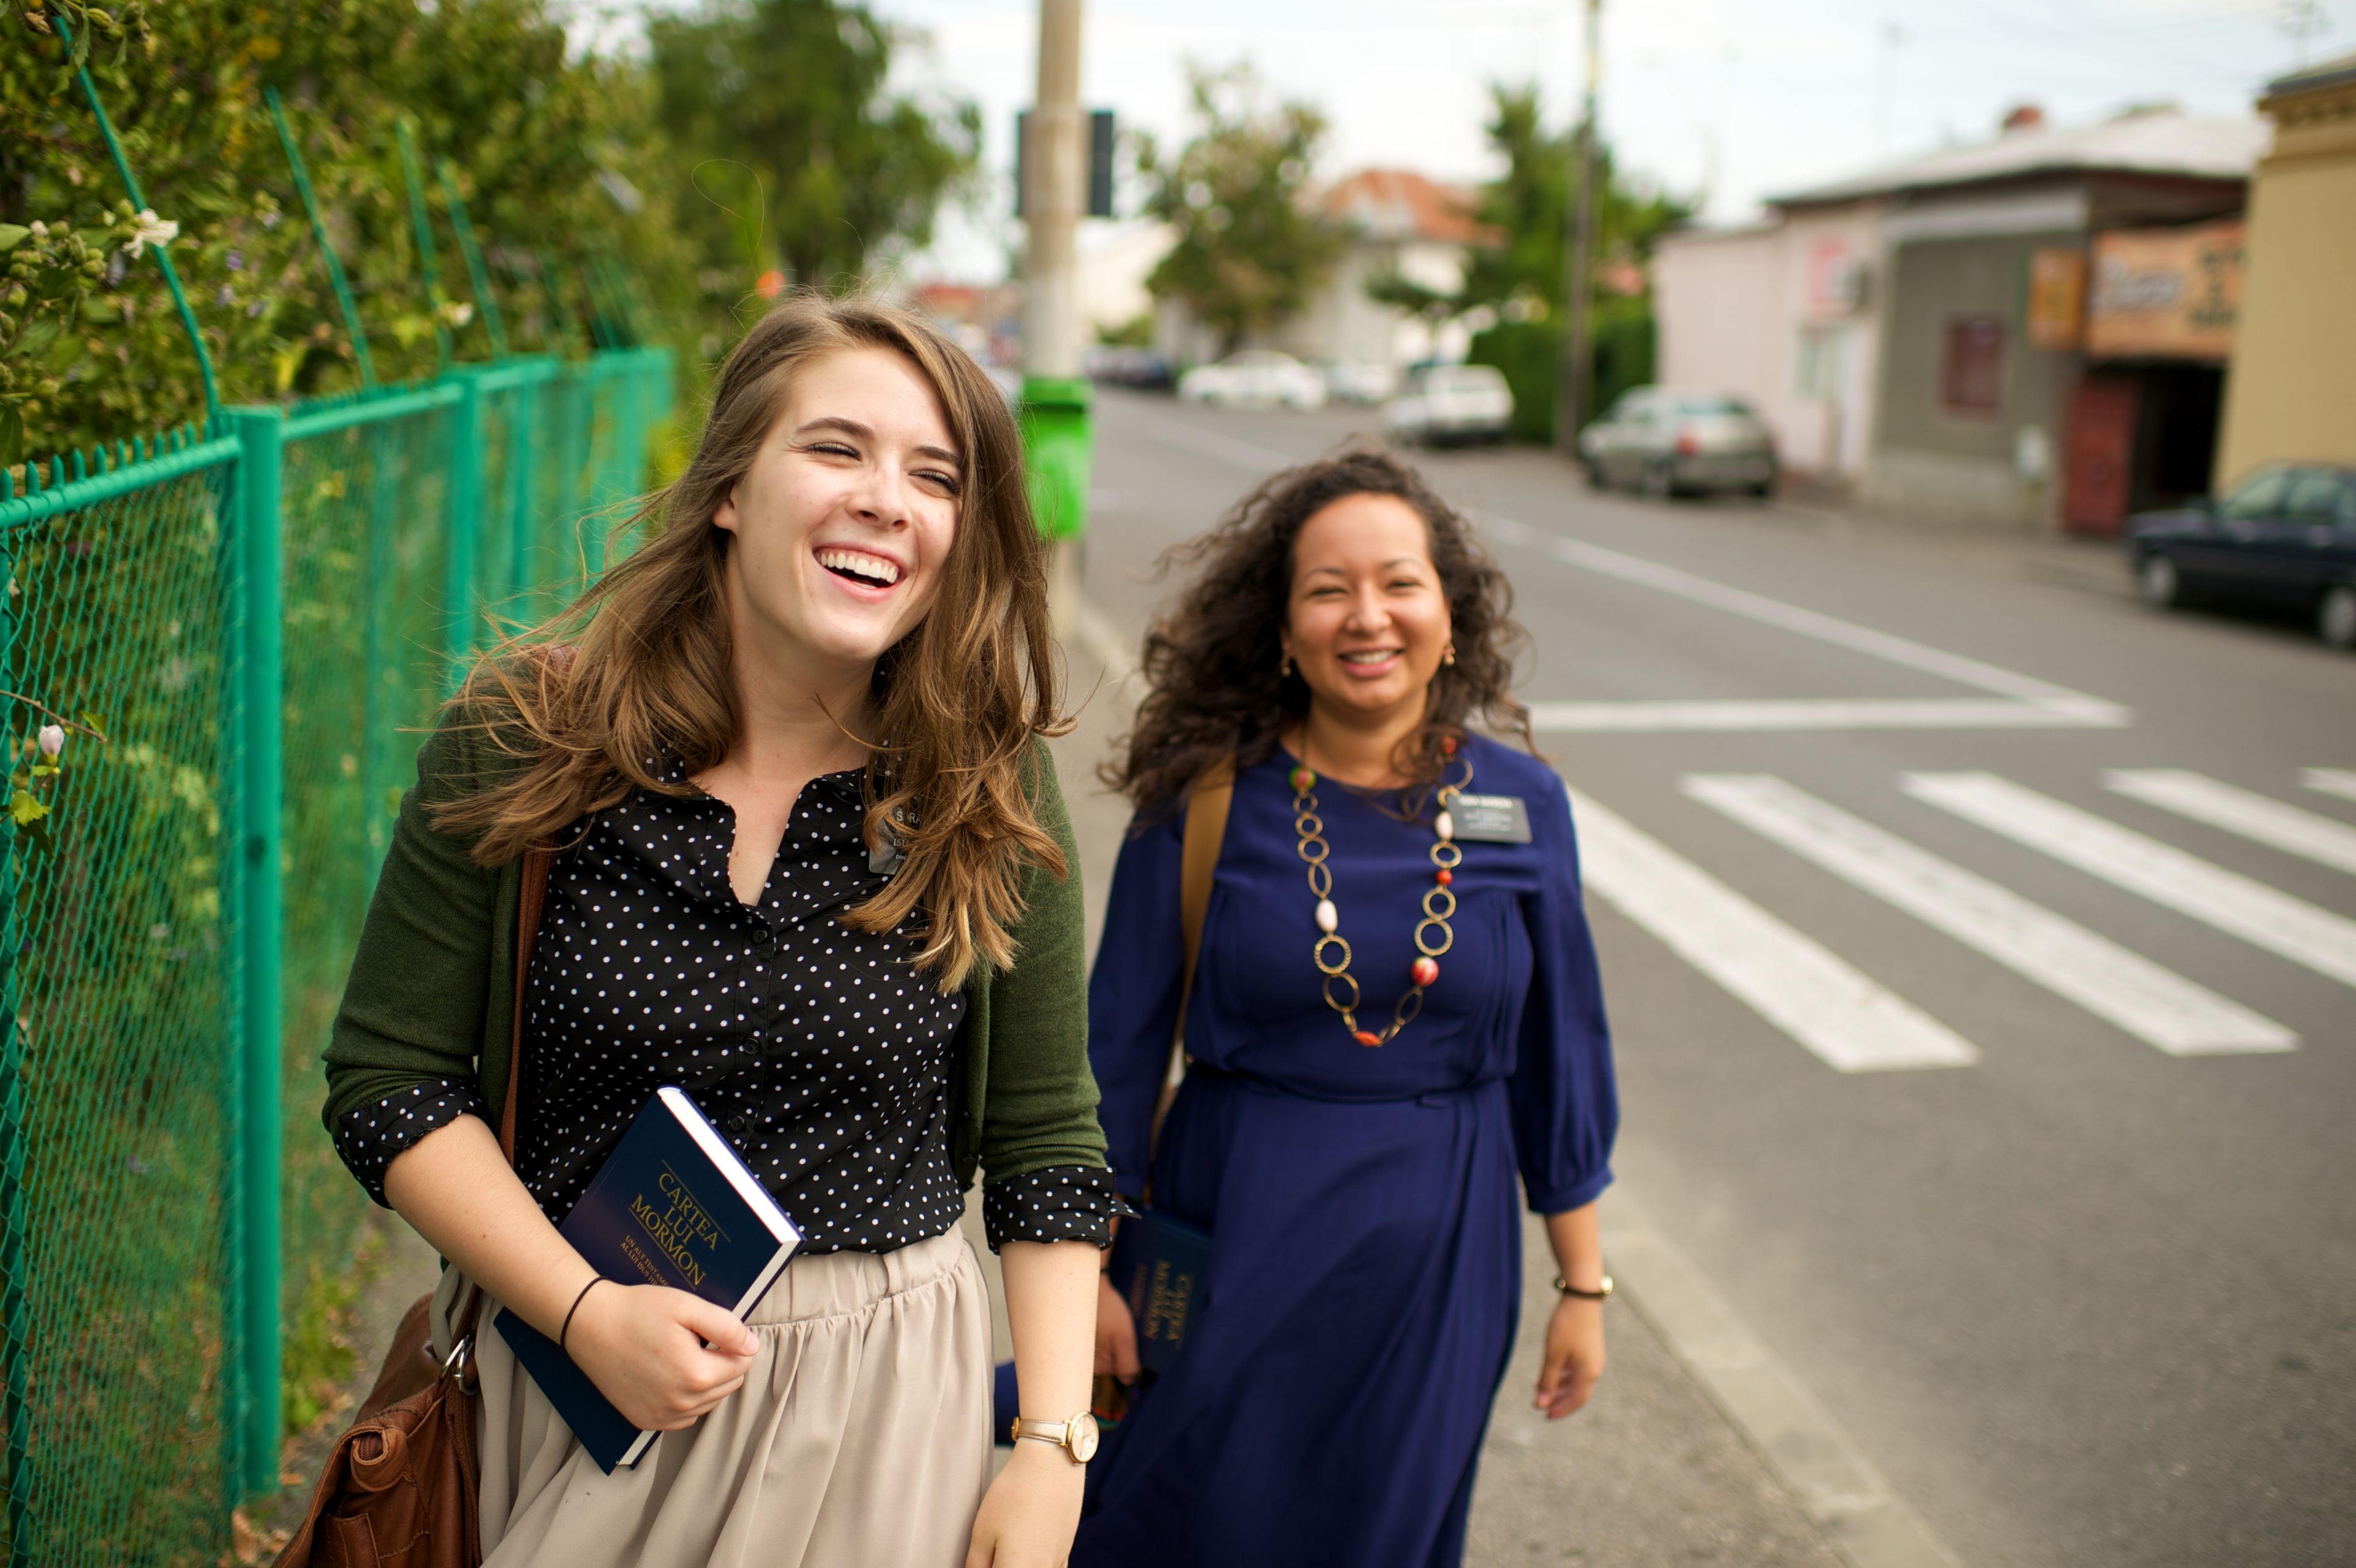 Two sister missionaries in Romania laugh while walking down a street together.